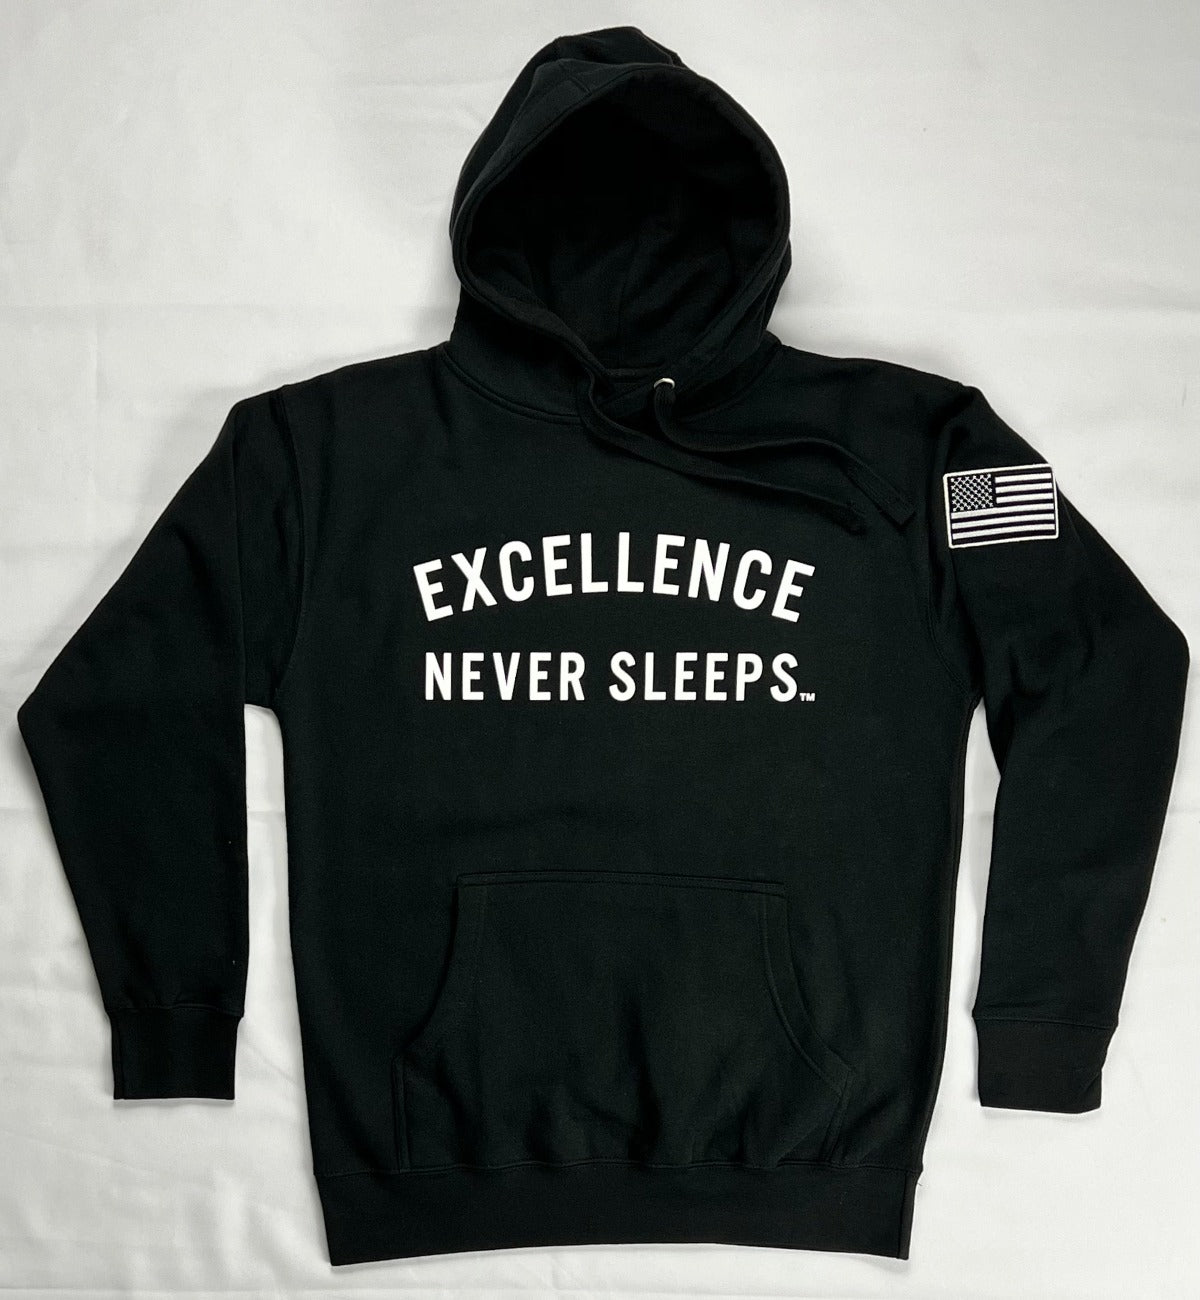 Excellence Never Sleeps   Printed graphic on front. Printed graphic on back.  Embroidered Patch Sewn on Left Sleeve.   8.5 oz Soft-Washed Comfort Weight Fleece  Facing yarn (outside print surface) is 100% Cotton  65% Ringspun Cotton 35% Polyester.  Sizes: S-M-L-XL-2XL  Color: Black